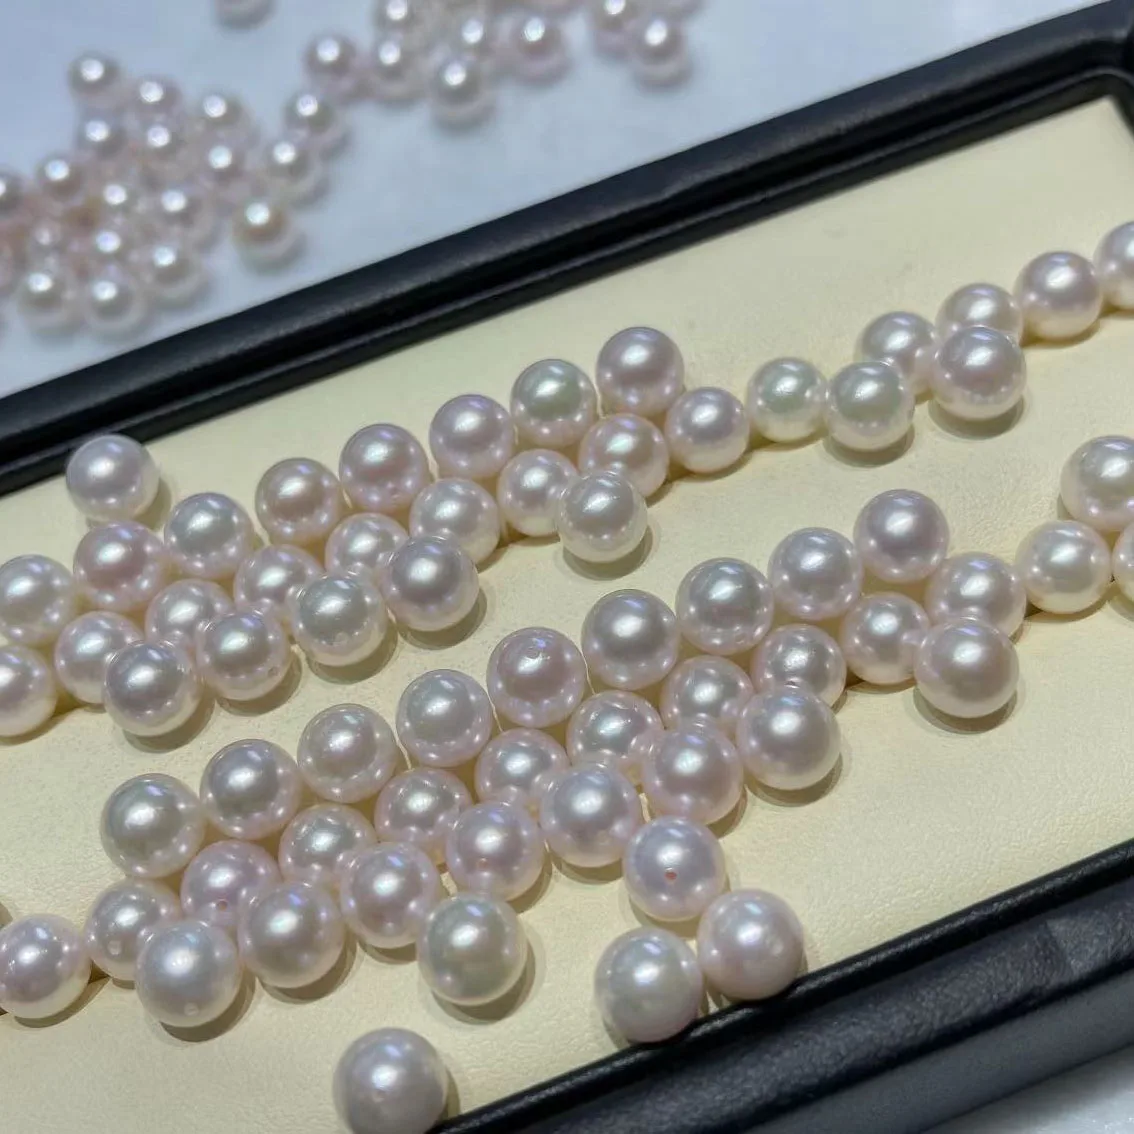 

7-7.5 mm high quality AAA white pearl round nature loose akoya pearl after hole almost no flaw whole sale price